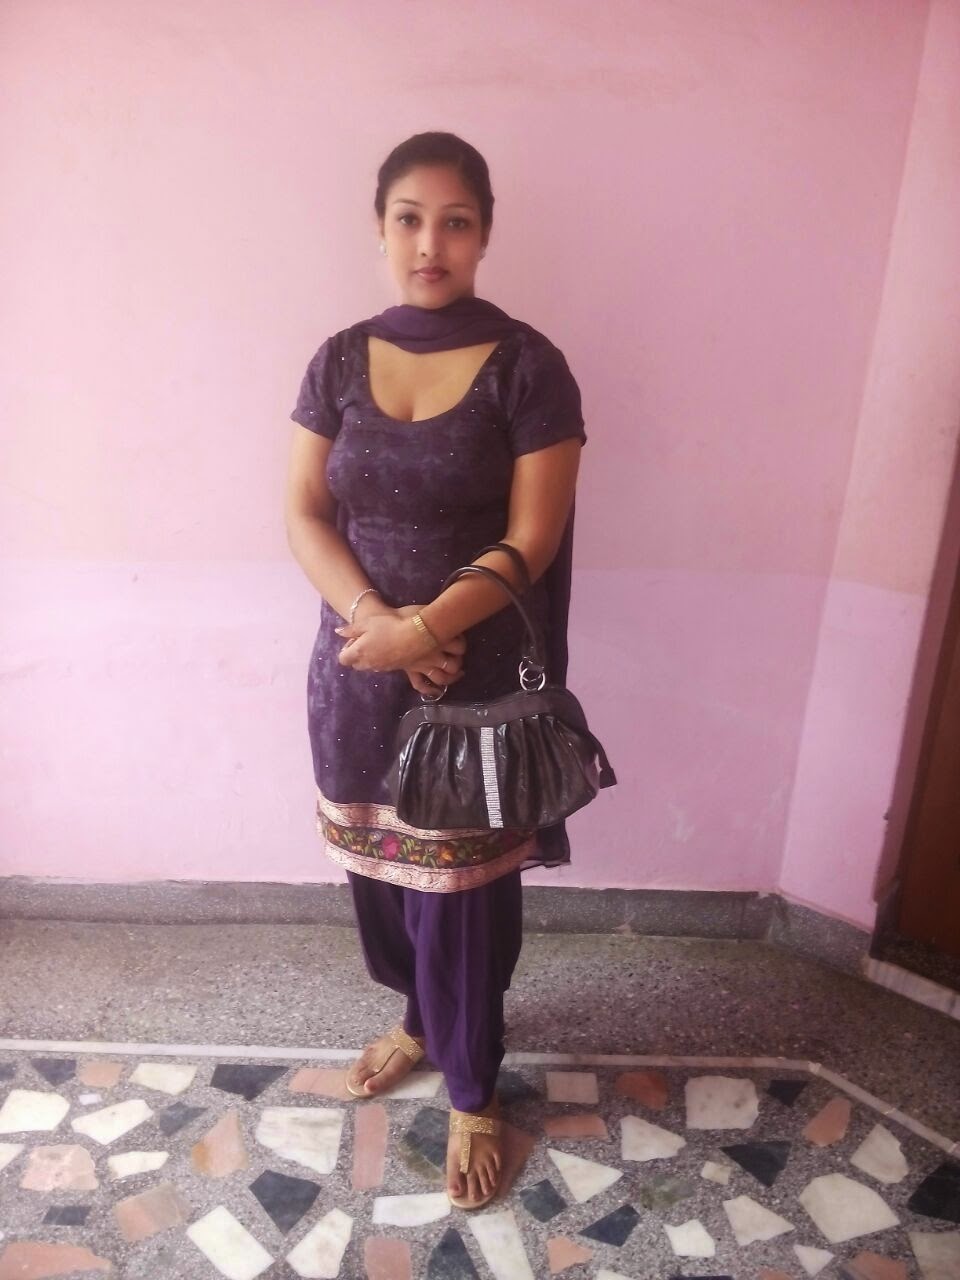 Indian Maids For Singapore Telugu And Punjabi Maids For Work Singapore More Details Send Msg My